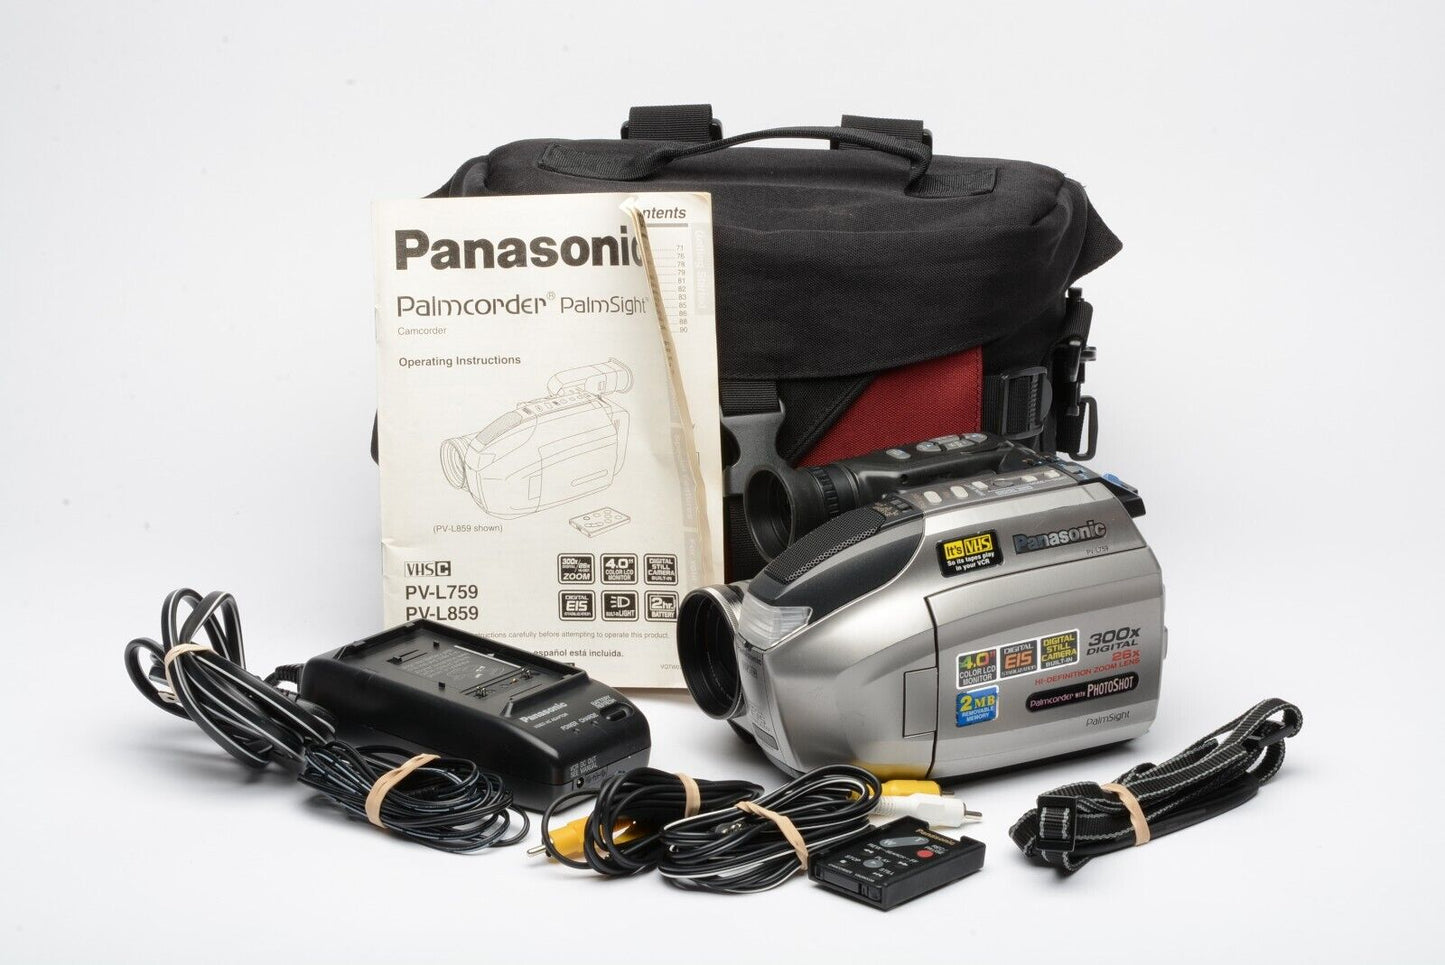 EXC++ PANASONIC PV-L759D VHS-C CAMCORDER, REMOTE, CHARGER, MANUAL, TESTED, GREAT